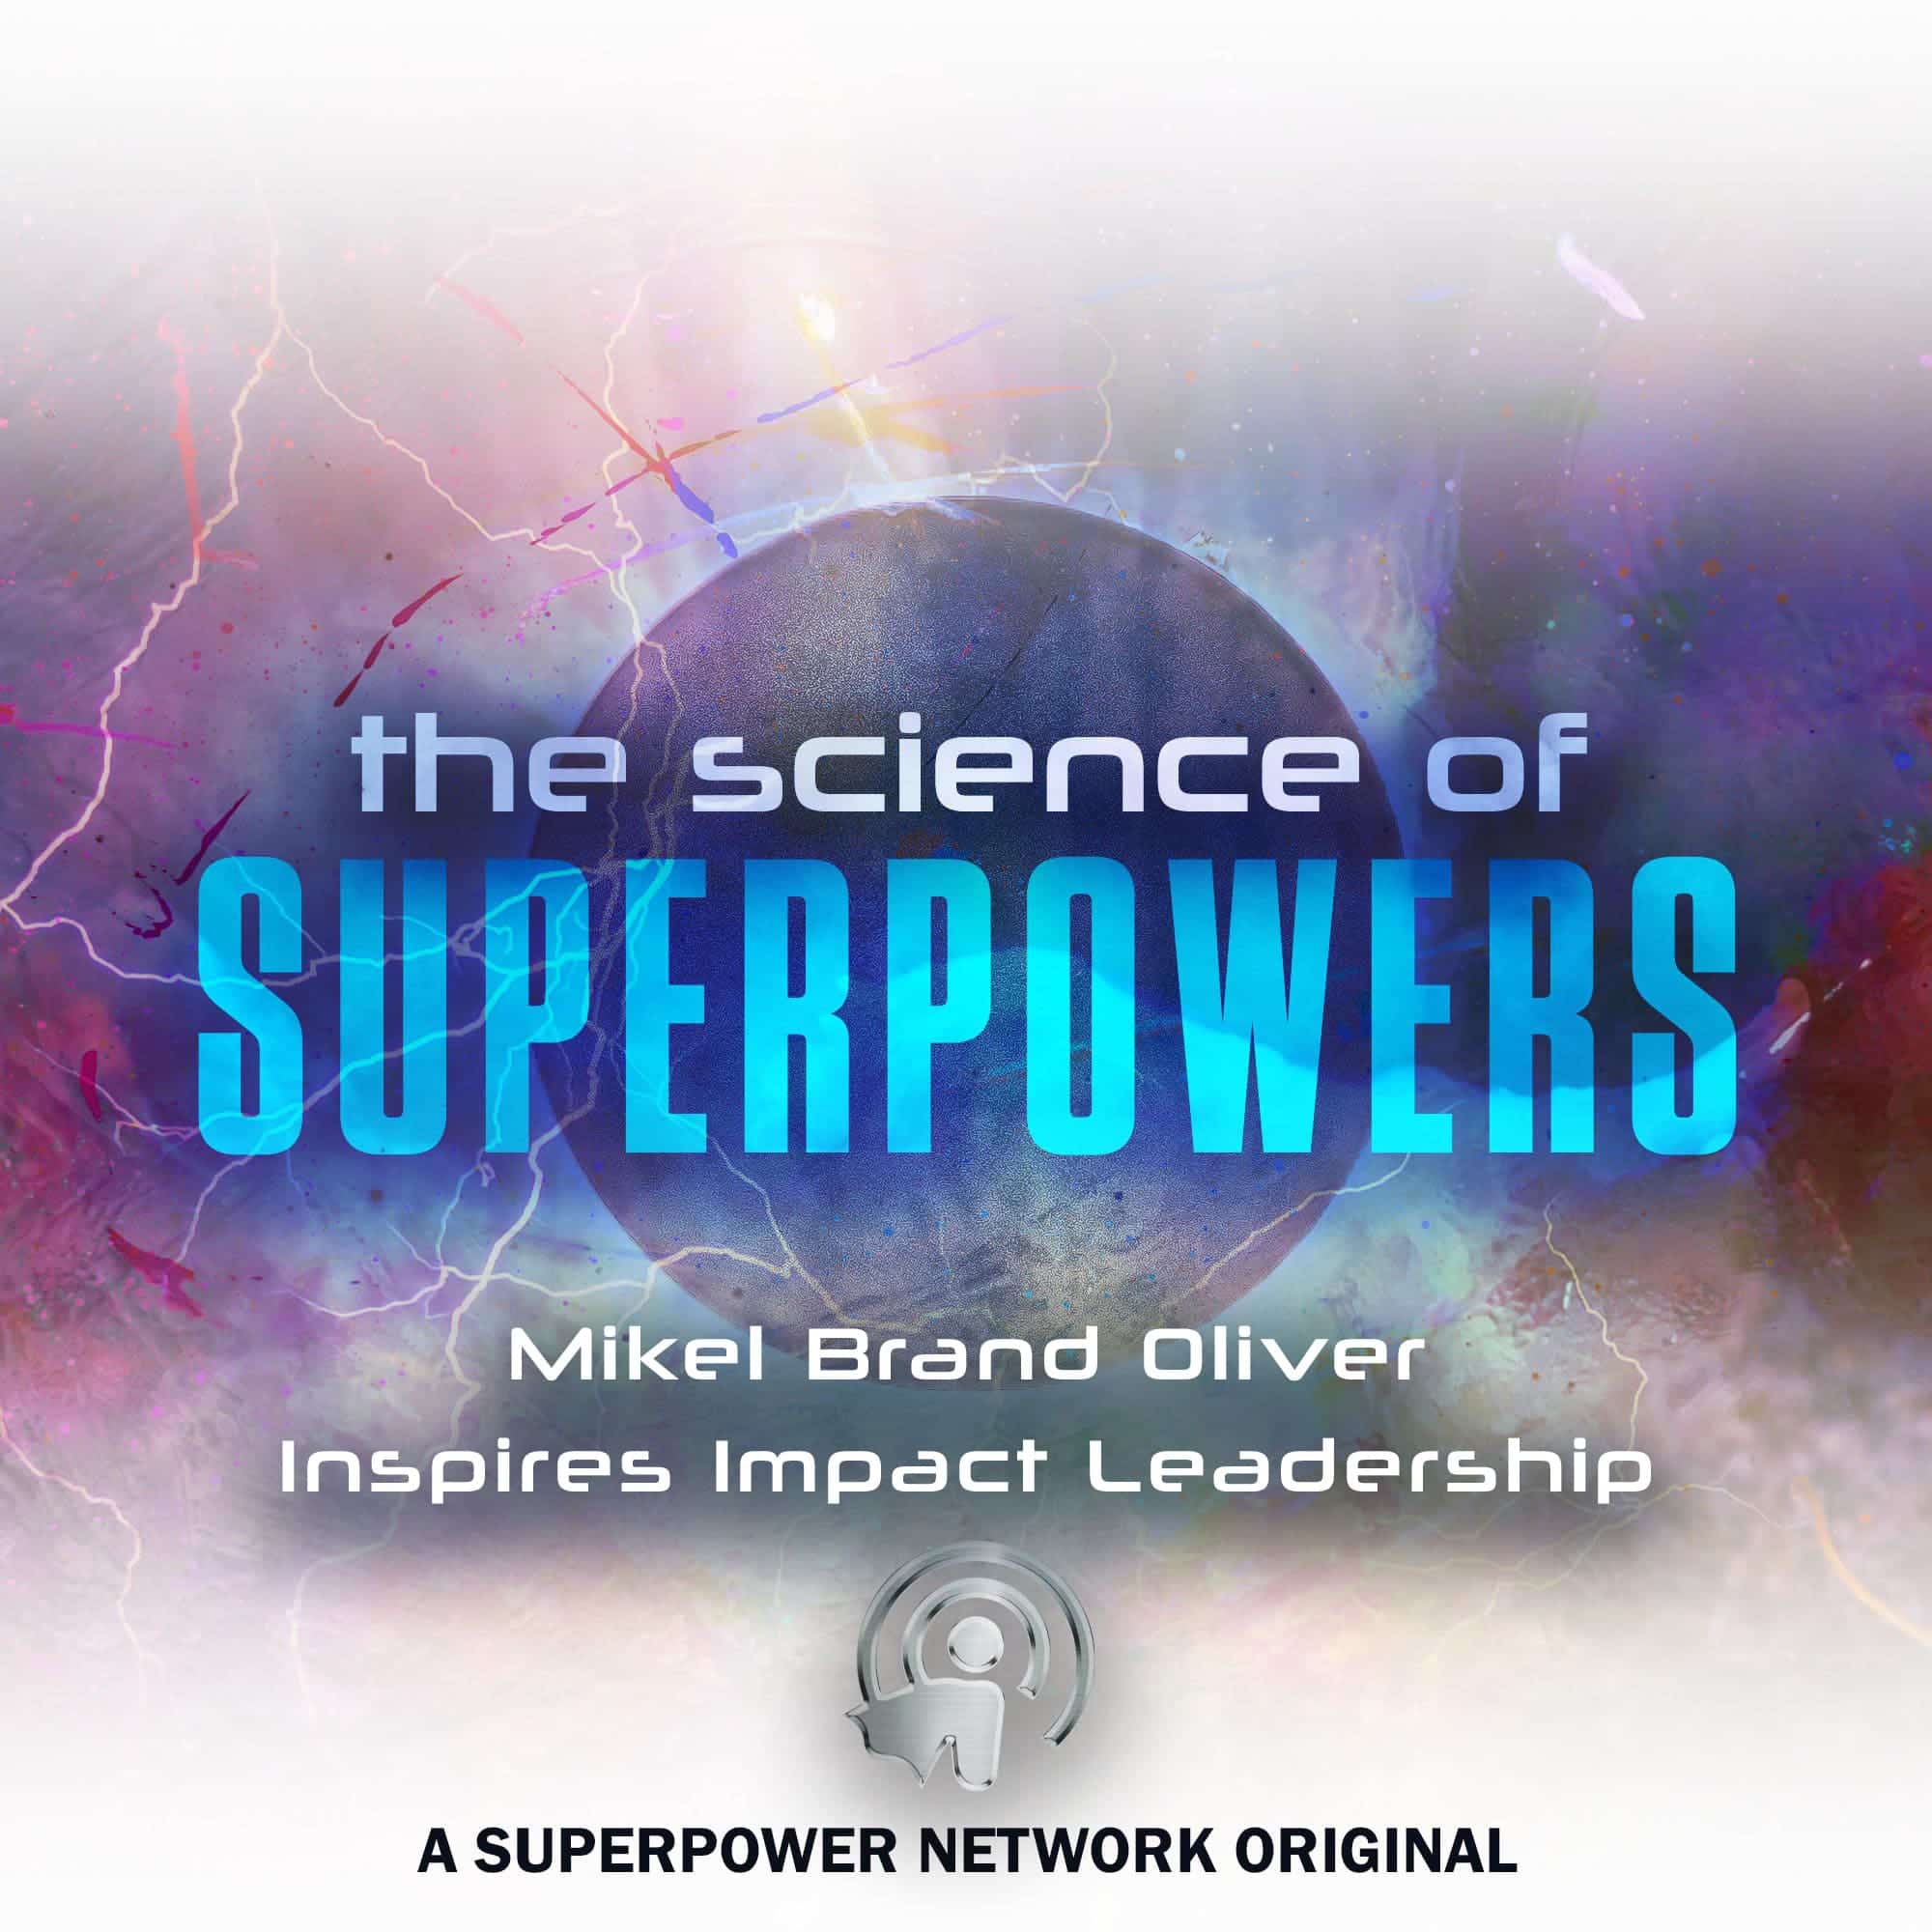 The Science of Superpowers, SOS. Mikel Brand Oliver, Inspires Impact Leadership, Master Your Personal Power #SOS #MasterYourPersonalPower #superpowers #Superpowerexperts #SuperPowerNetwork